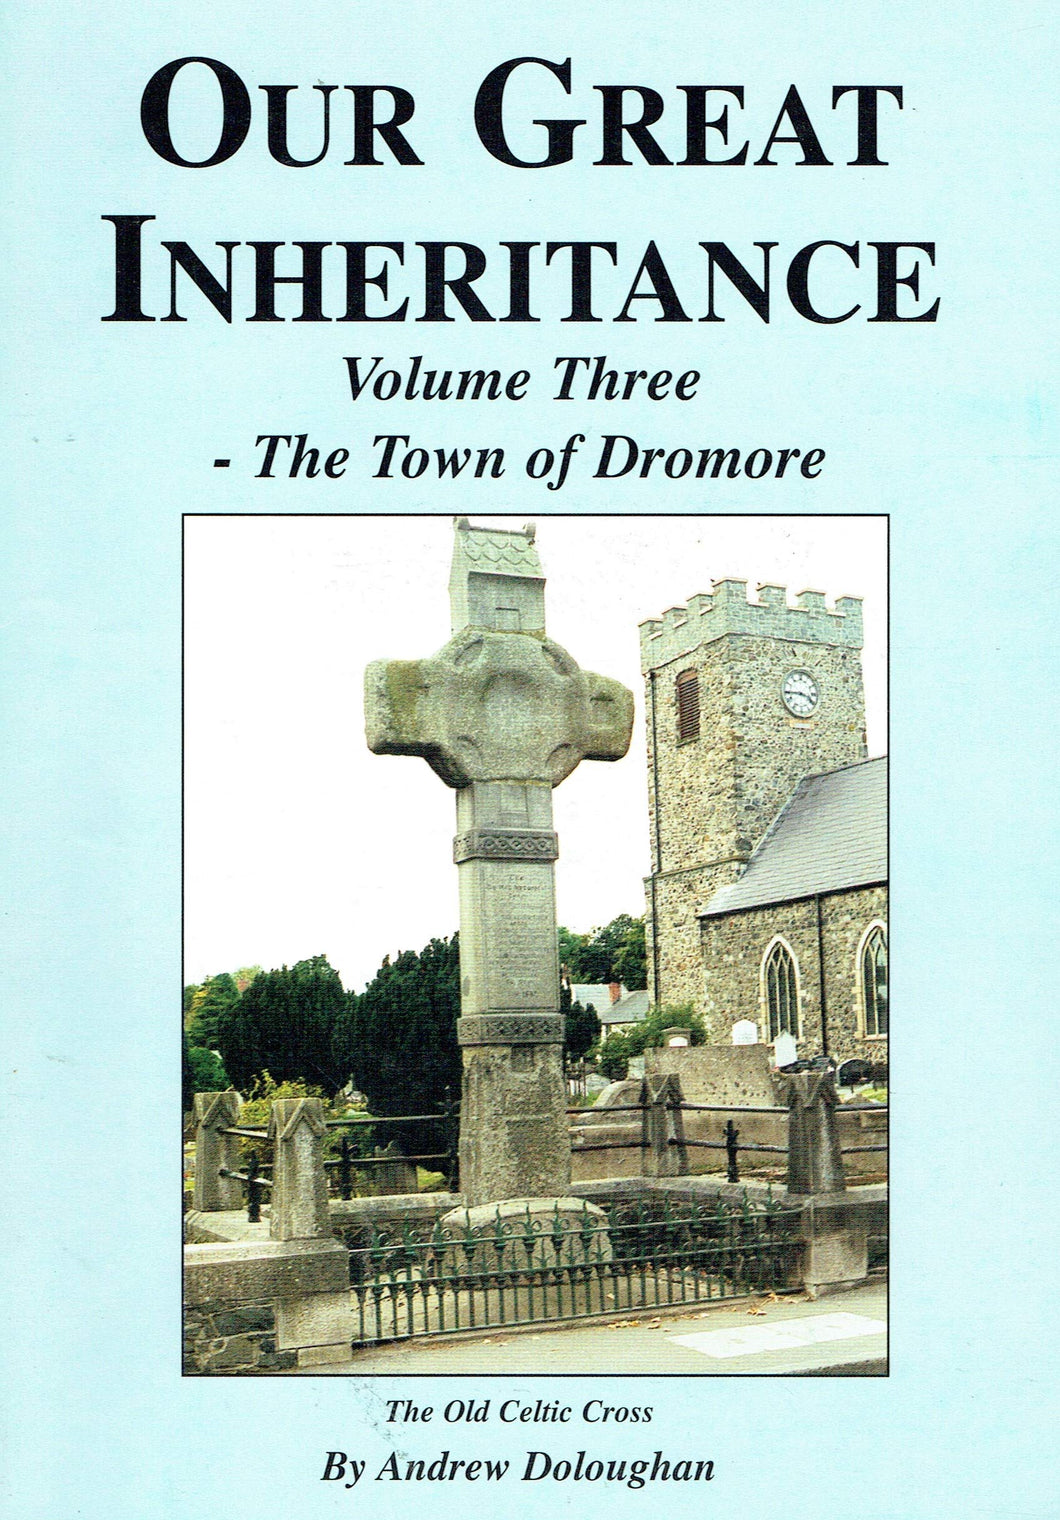 Our Great Inheritance: The Town of Dromore v. 3